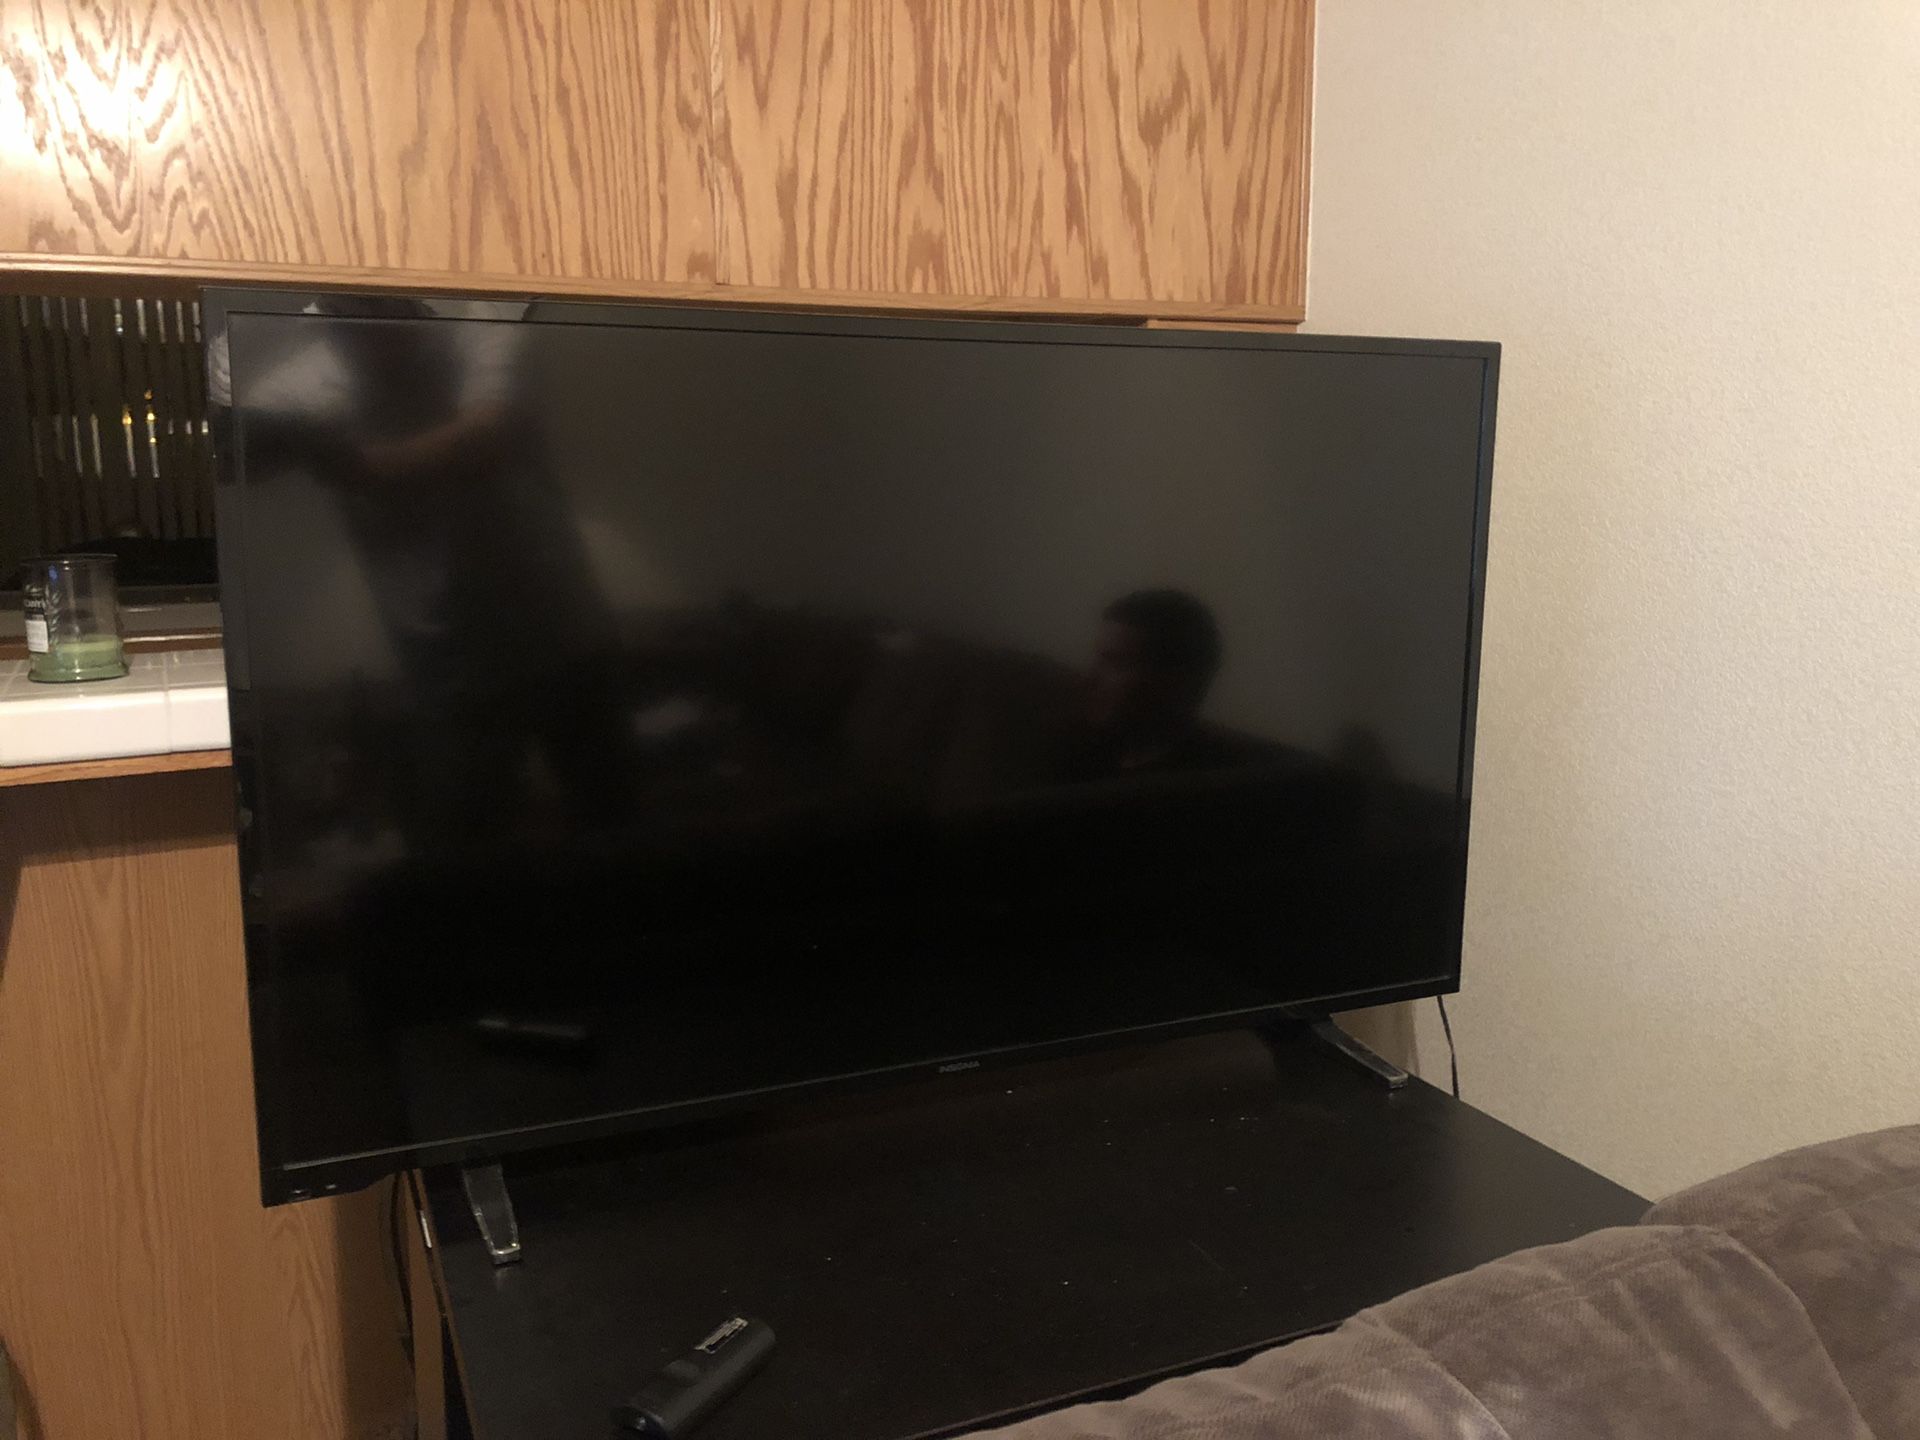 Insignia 50 inch tv. Work great just got a bigger tv. Comes with remote